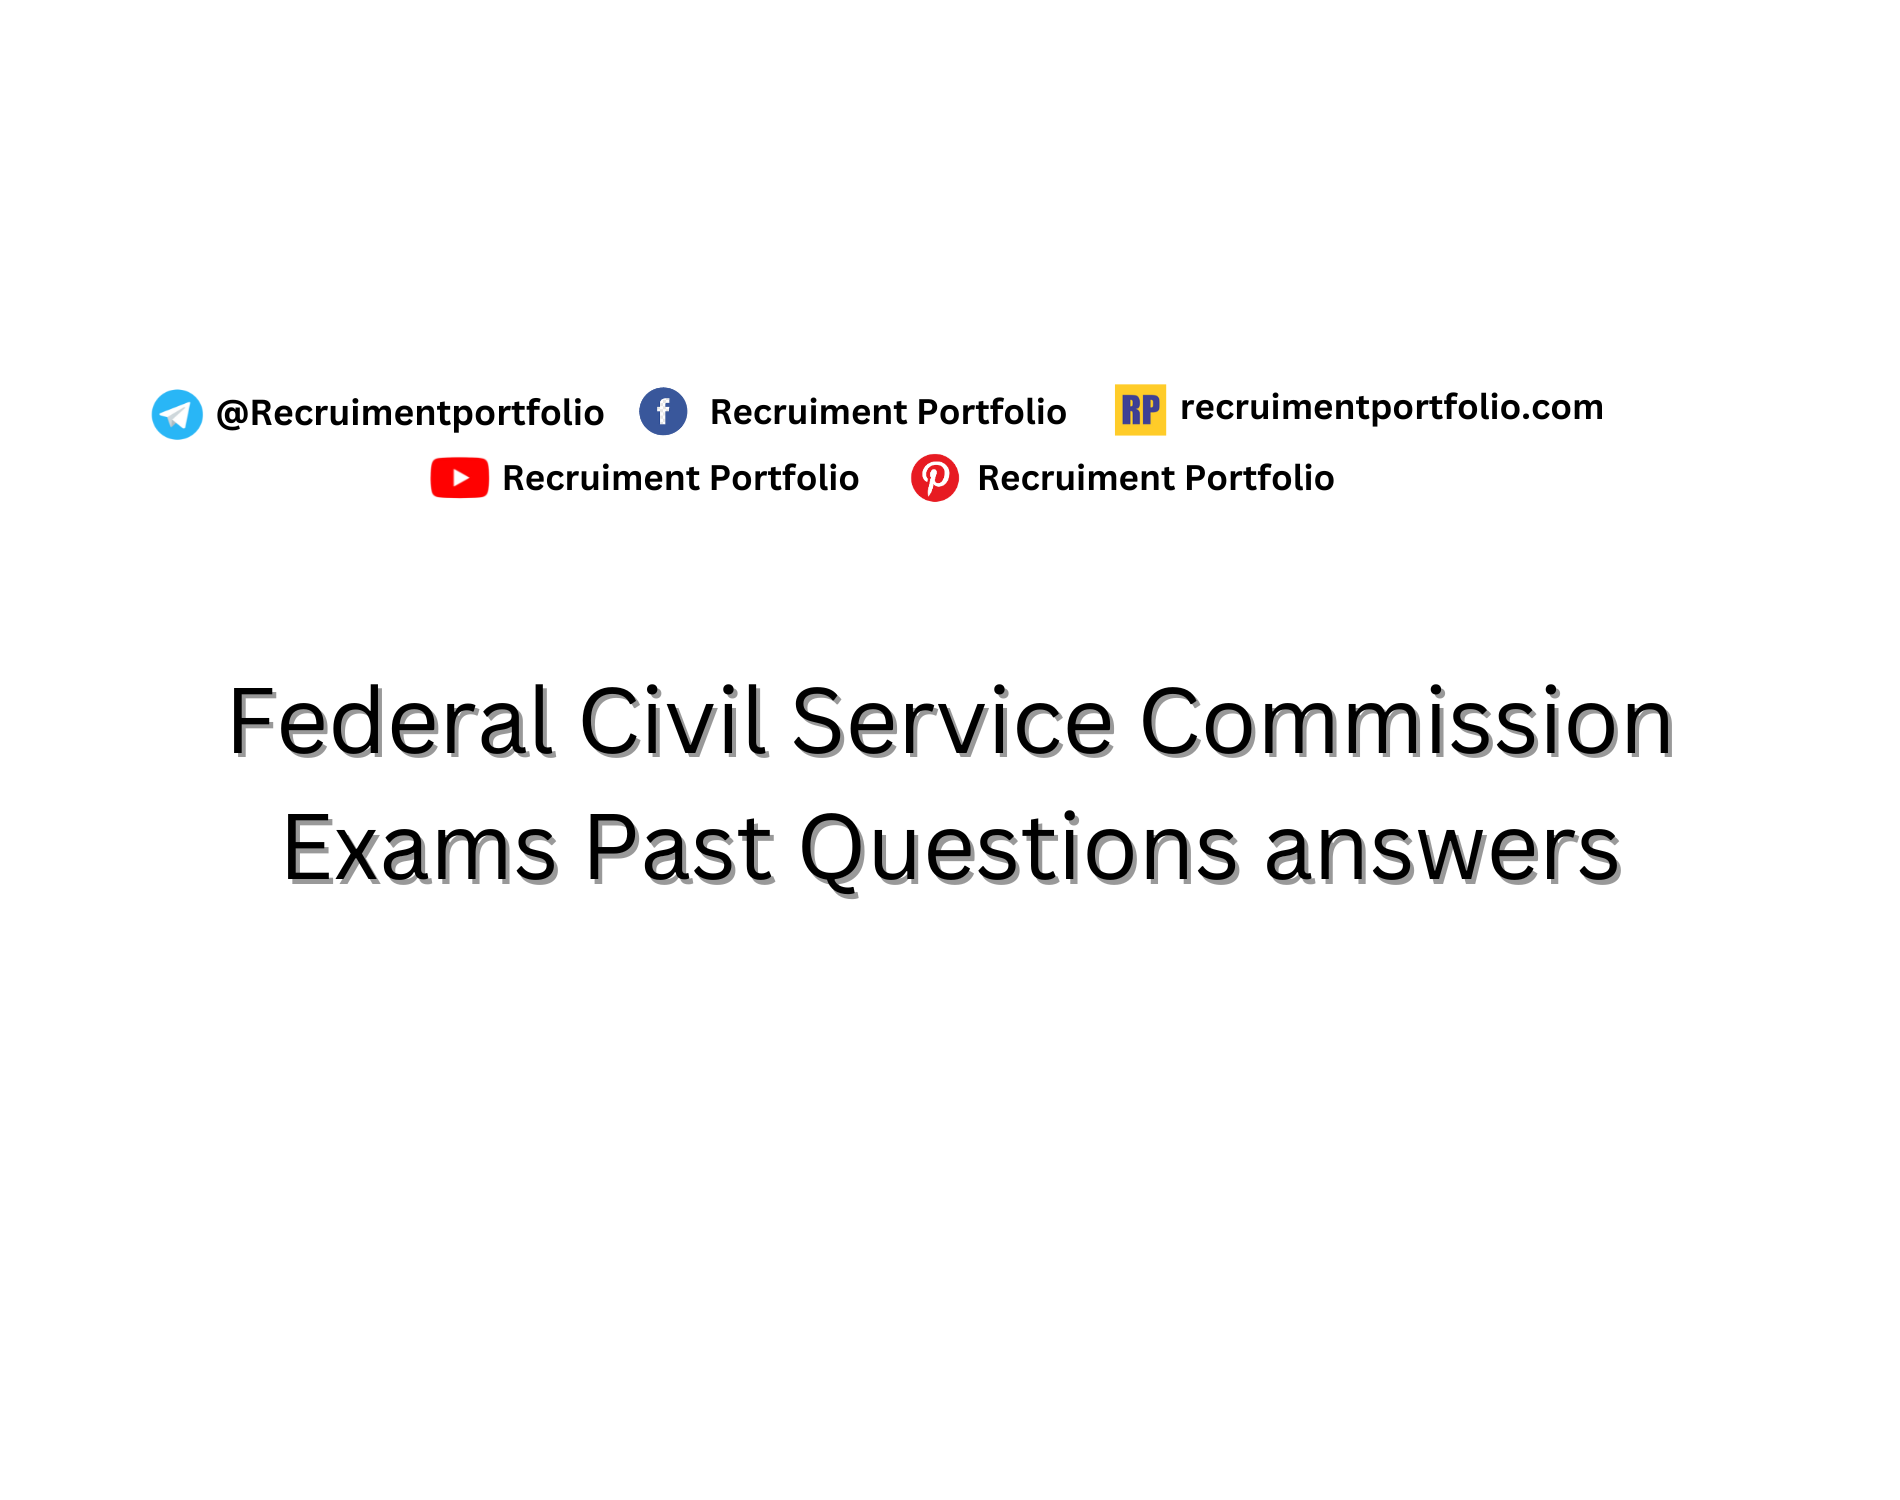 Federal Civil Service Commission Exams Past Questions and Answers